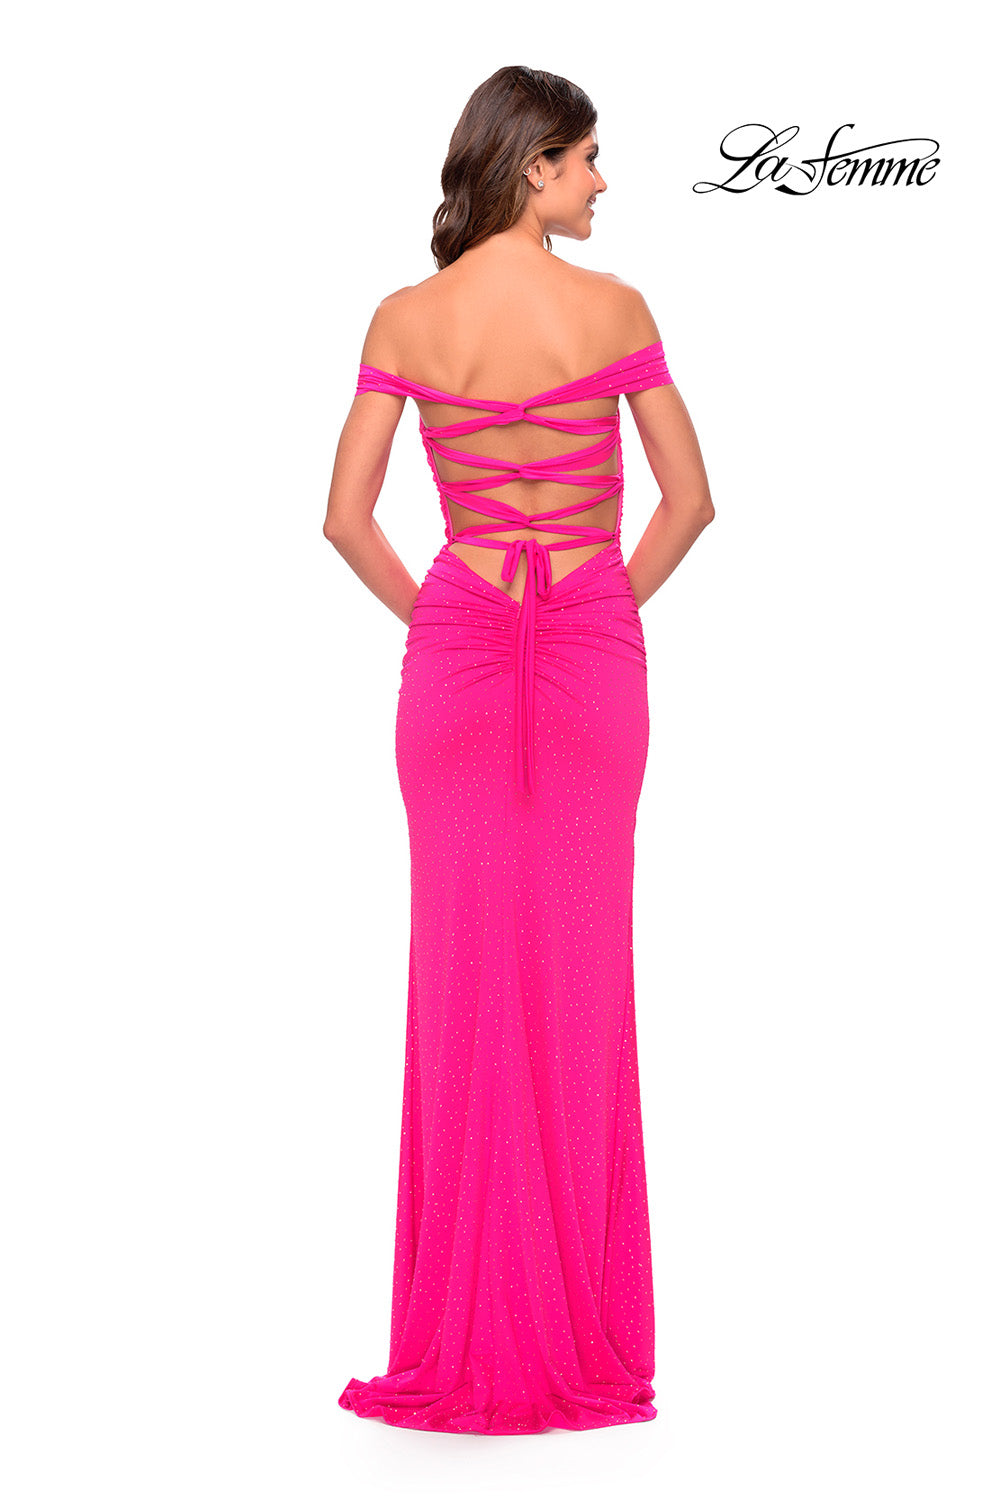 La Femme 31276 prom dress images.  La Femme 31276 is available in these colors: Light Periwinkle, Neon Pink, Royal Blue.